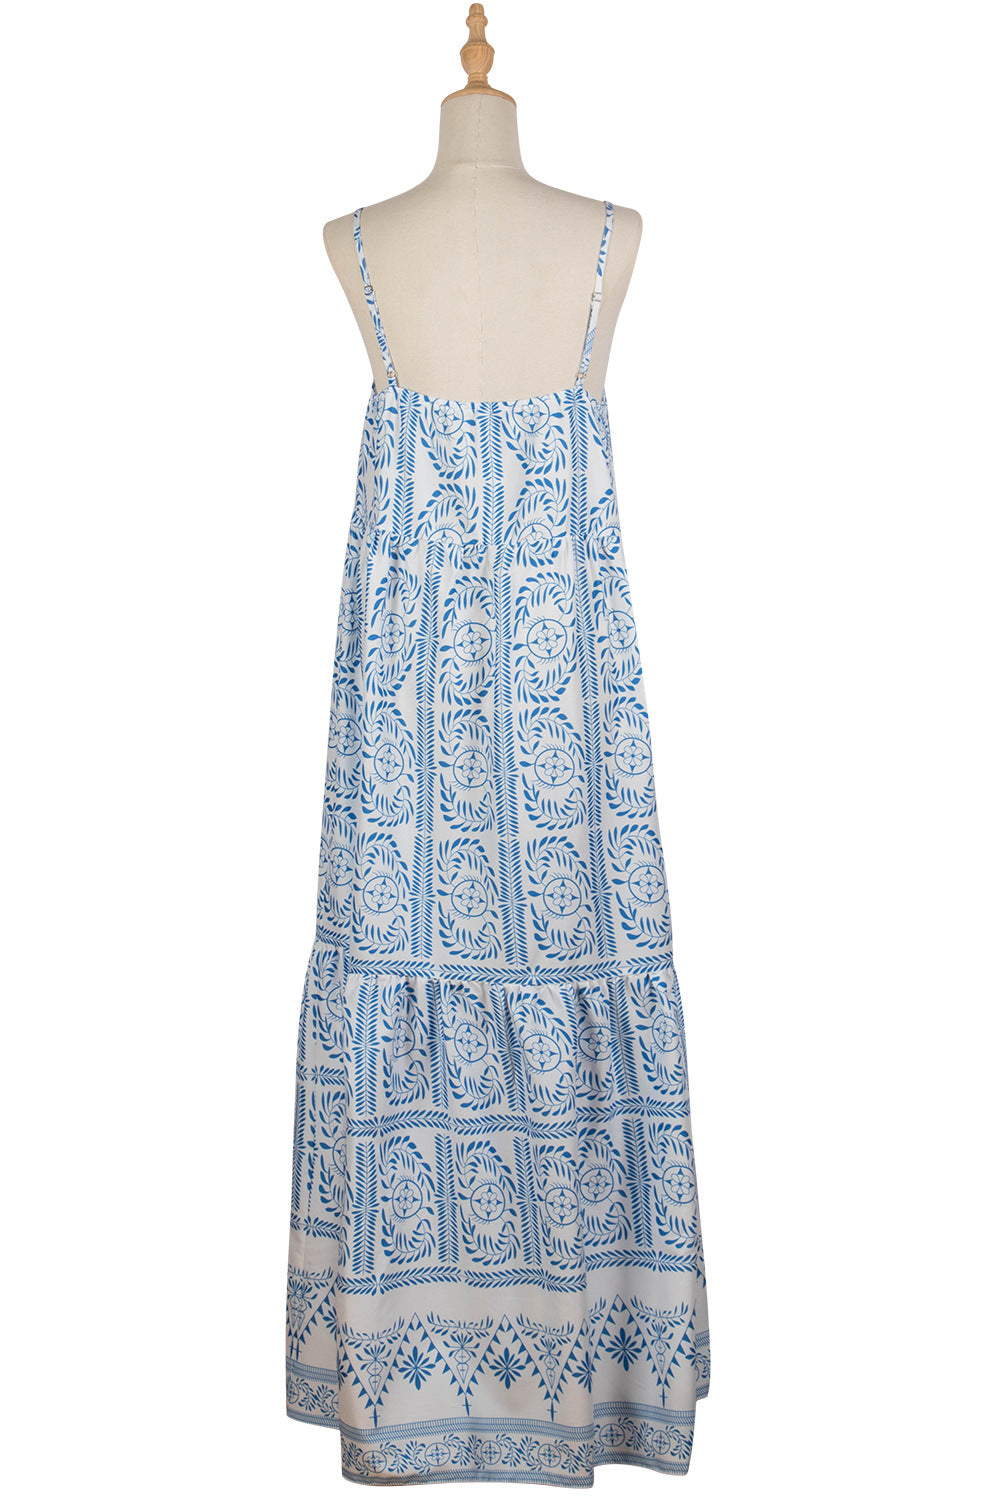 Step into Summer with a Chic Blue Print Bohemian Style Sling Dress for Women